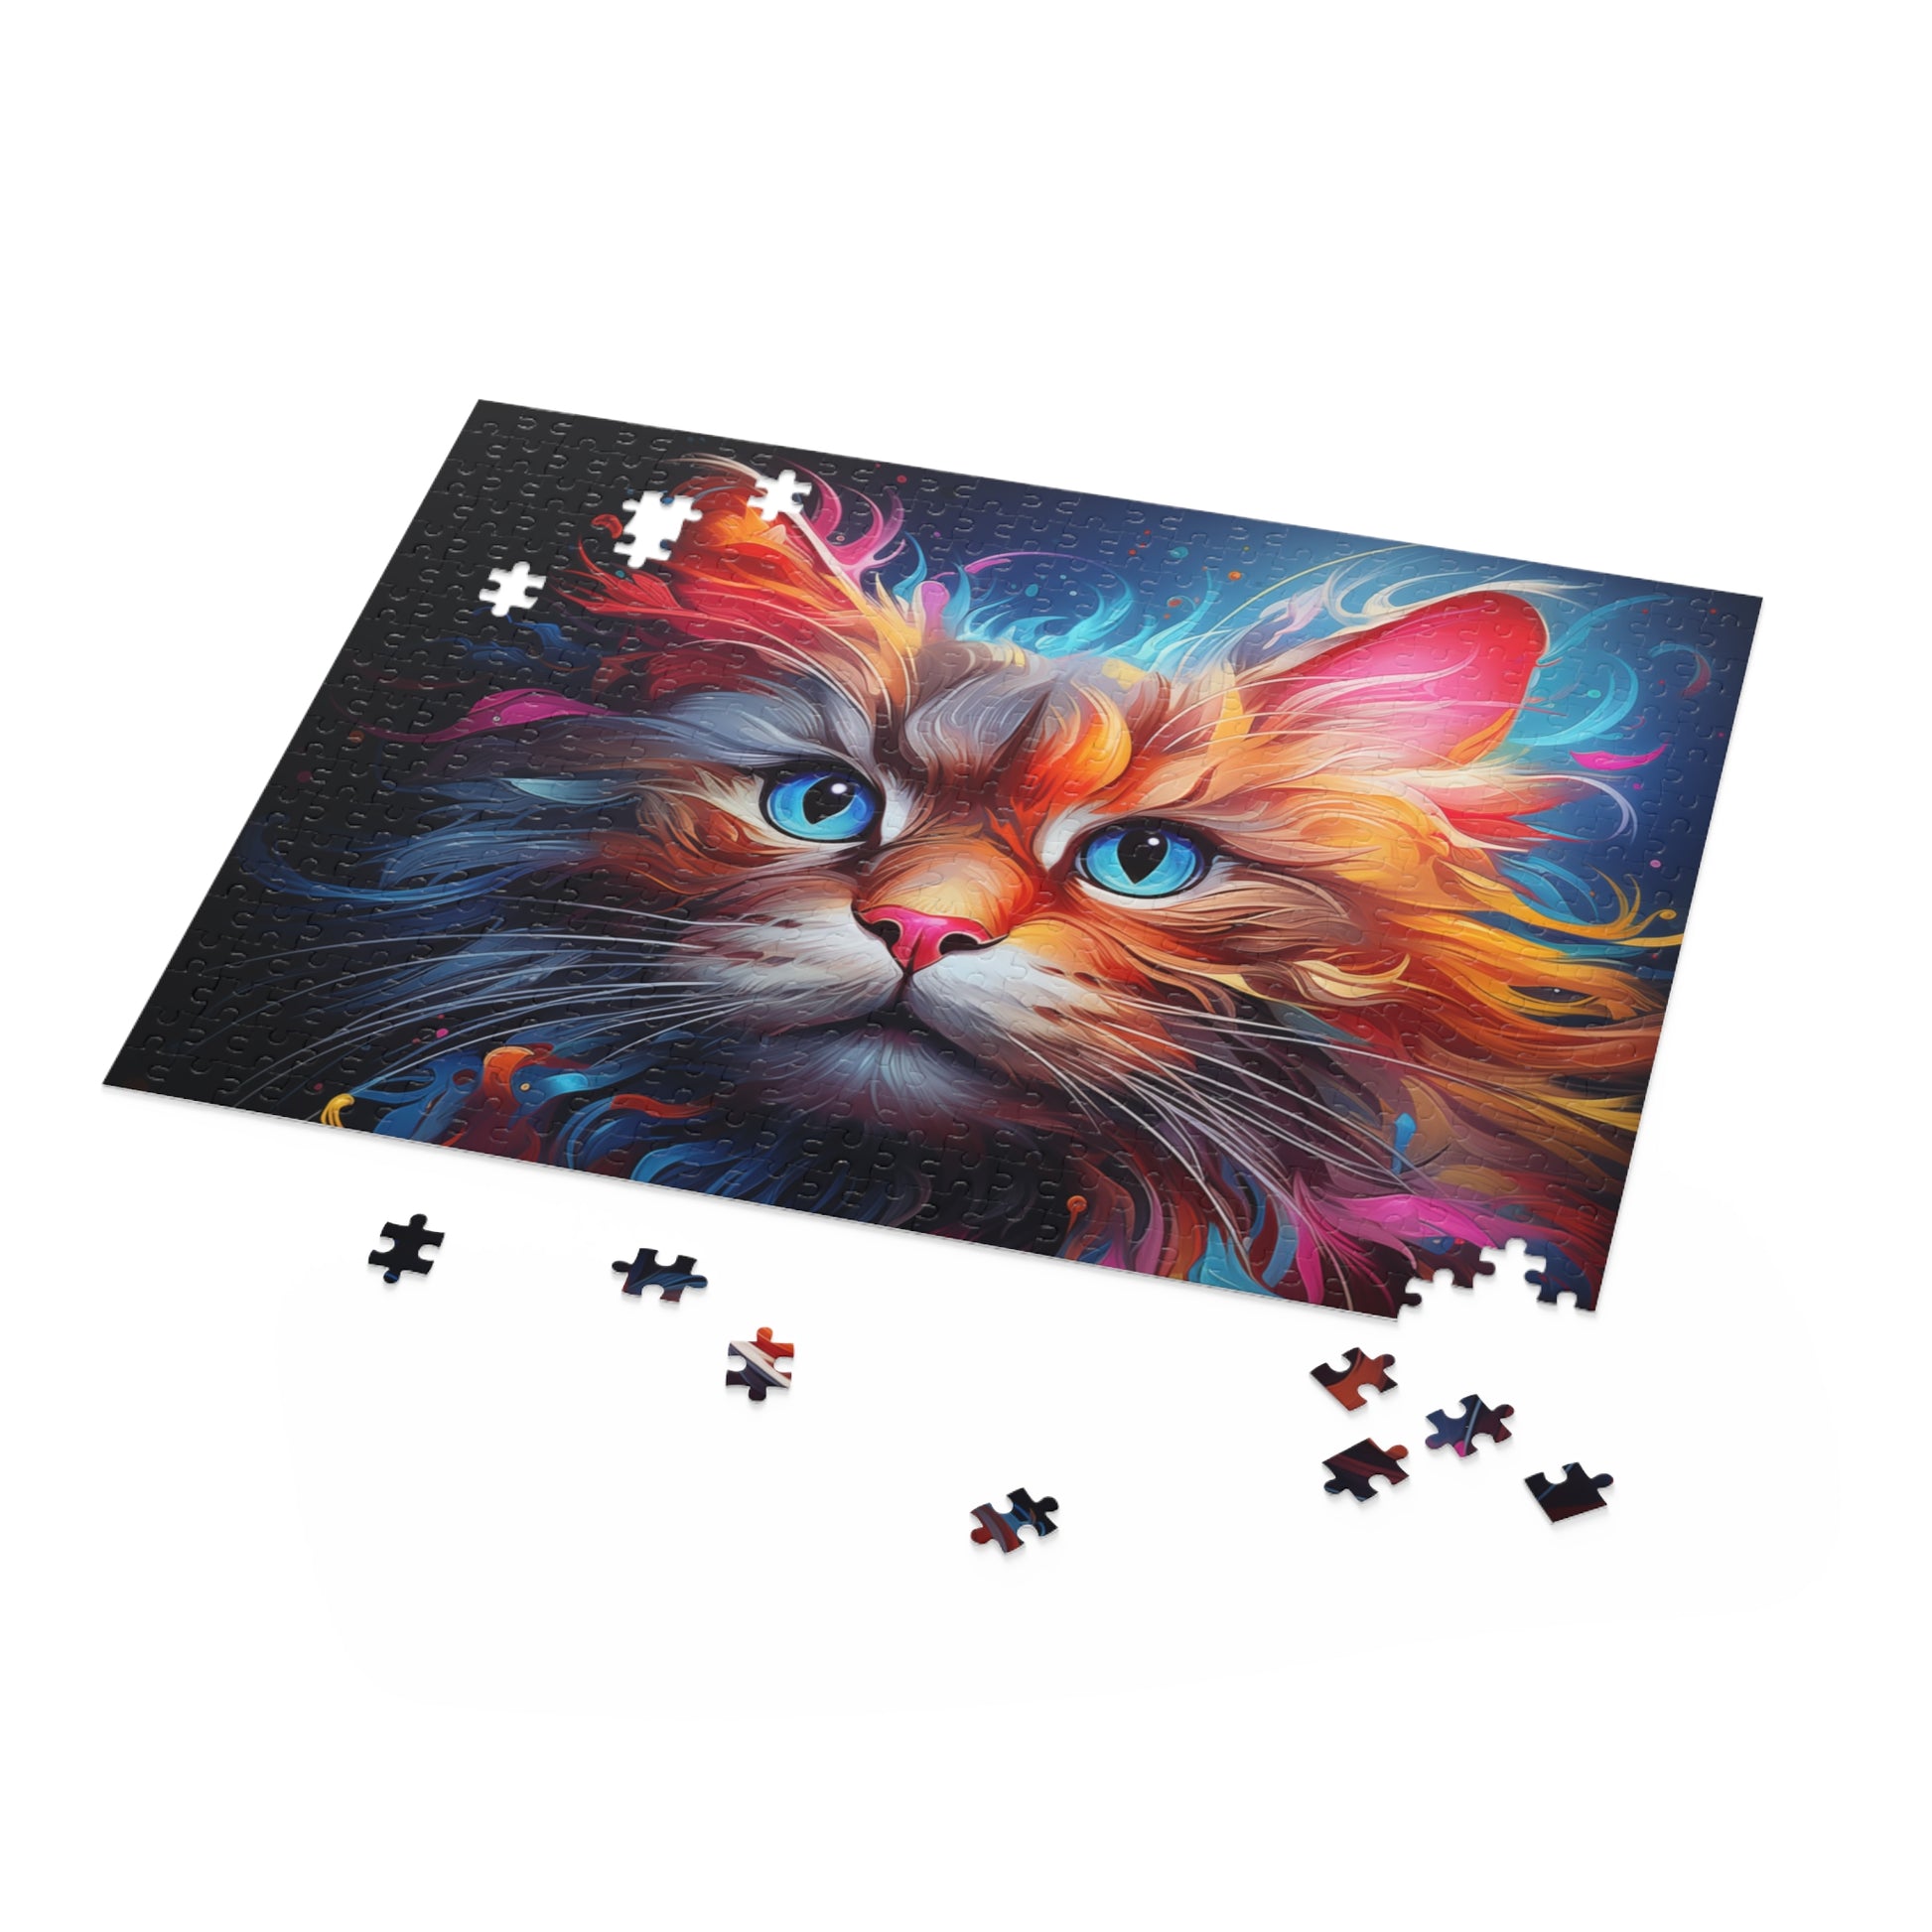 Abstract Cat Jigsaw Puzzle Adult Birthday Business Jigsaw Puzzle Gift for Him Funny Humorous Indoor Outdoor Game Gift For Her Online-5